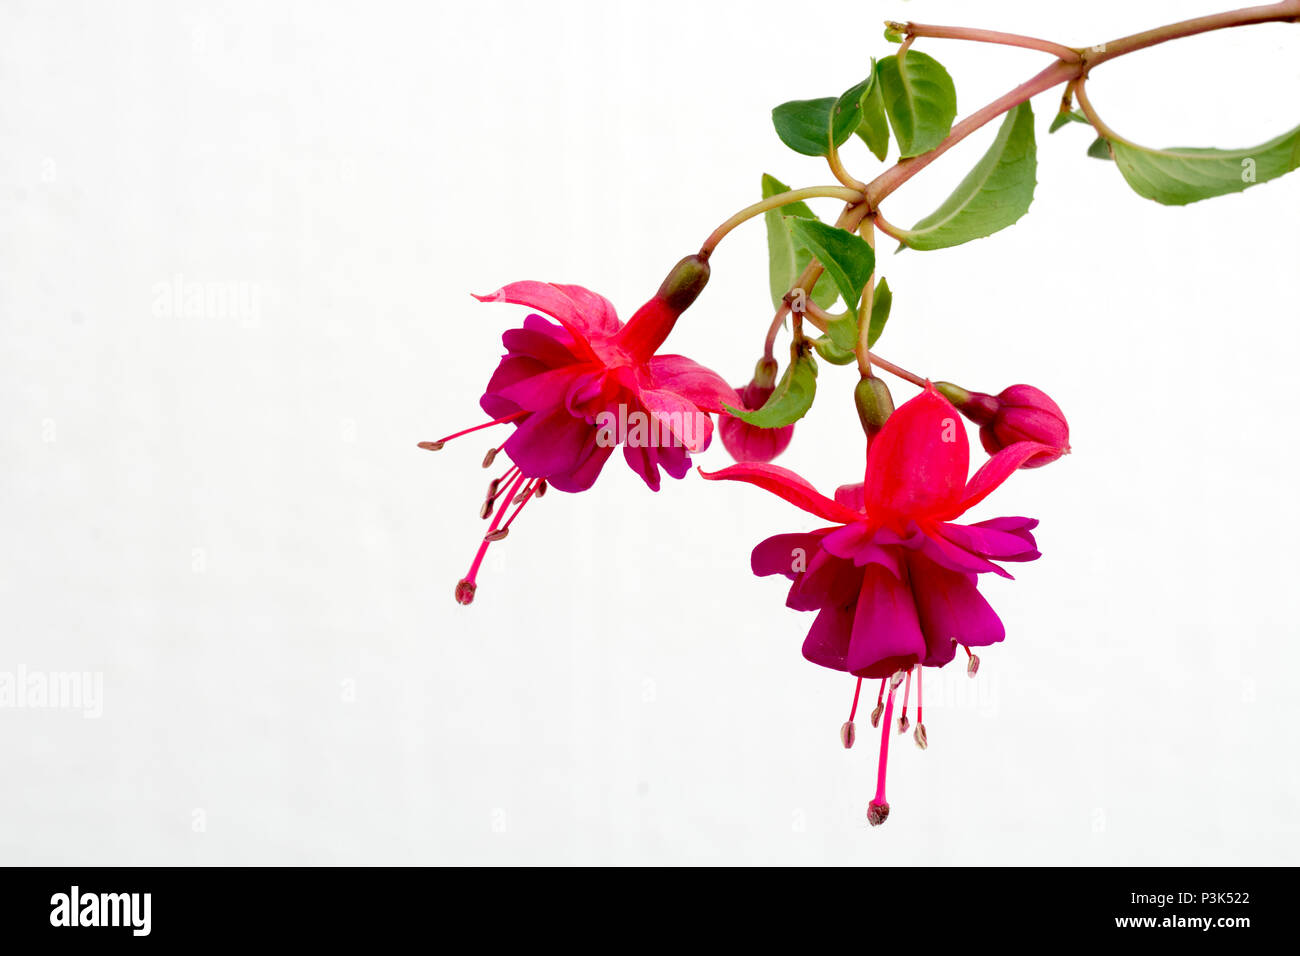 Beautiful detailed pink fuchsia branch and flowers isolated against white background Stock Photo